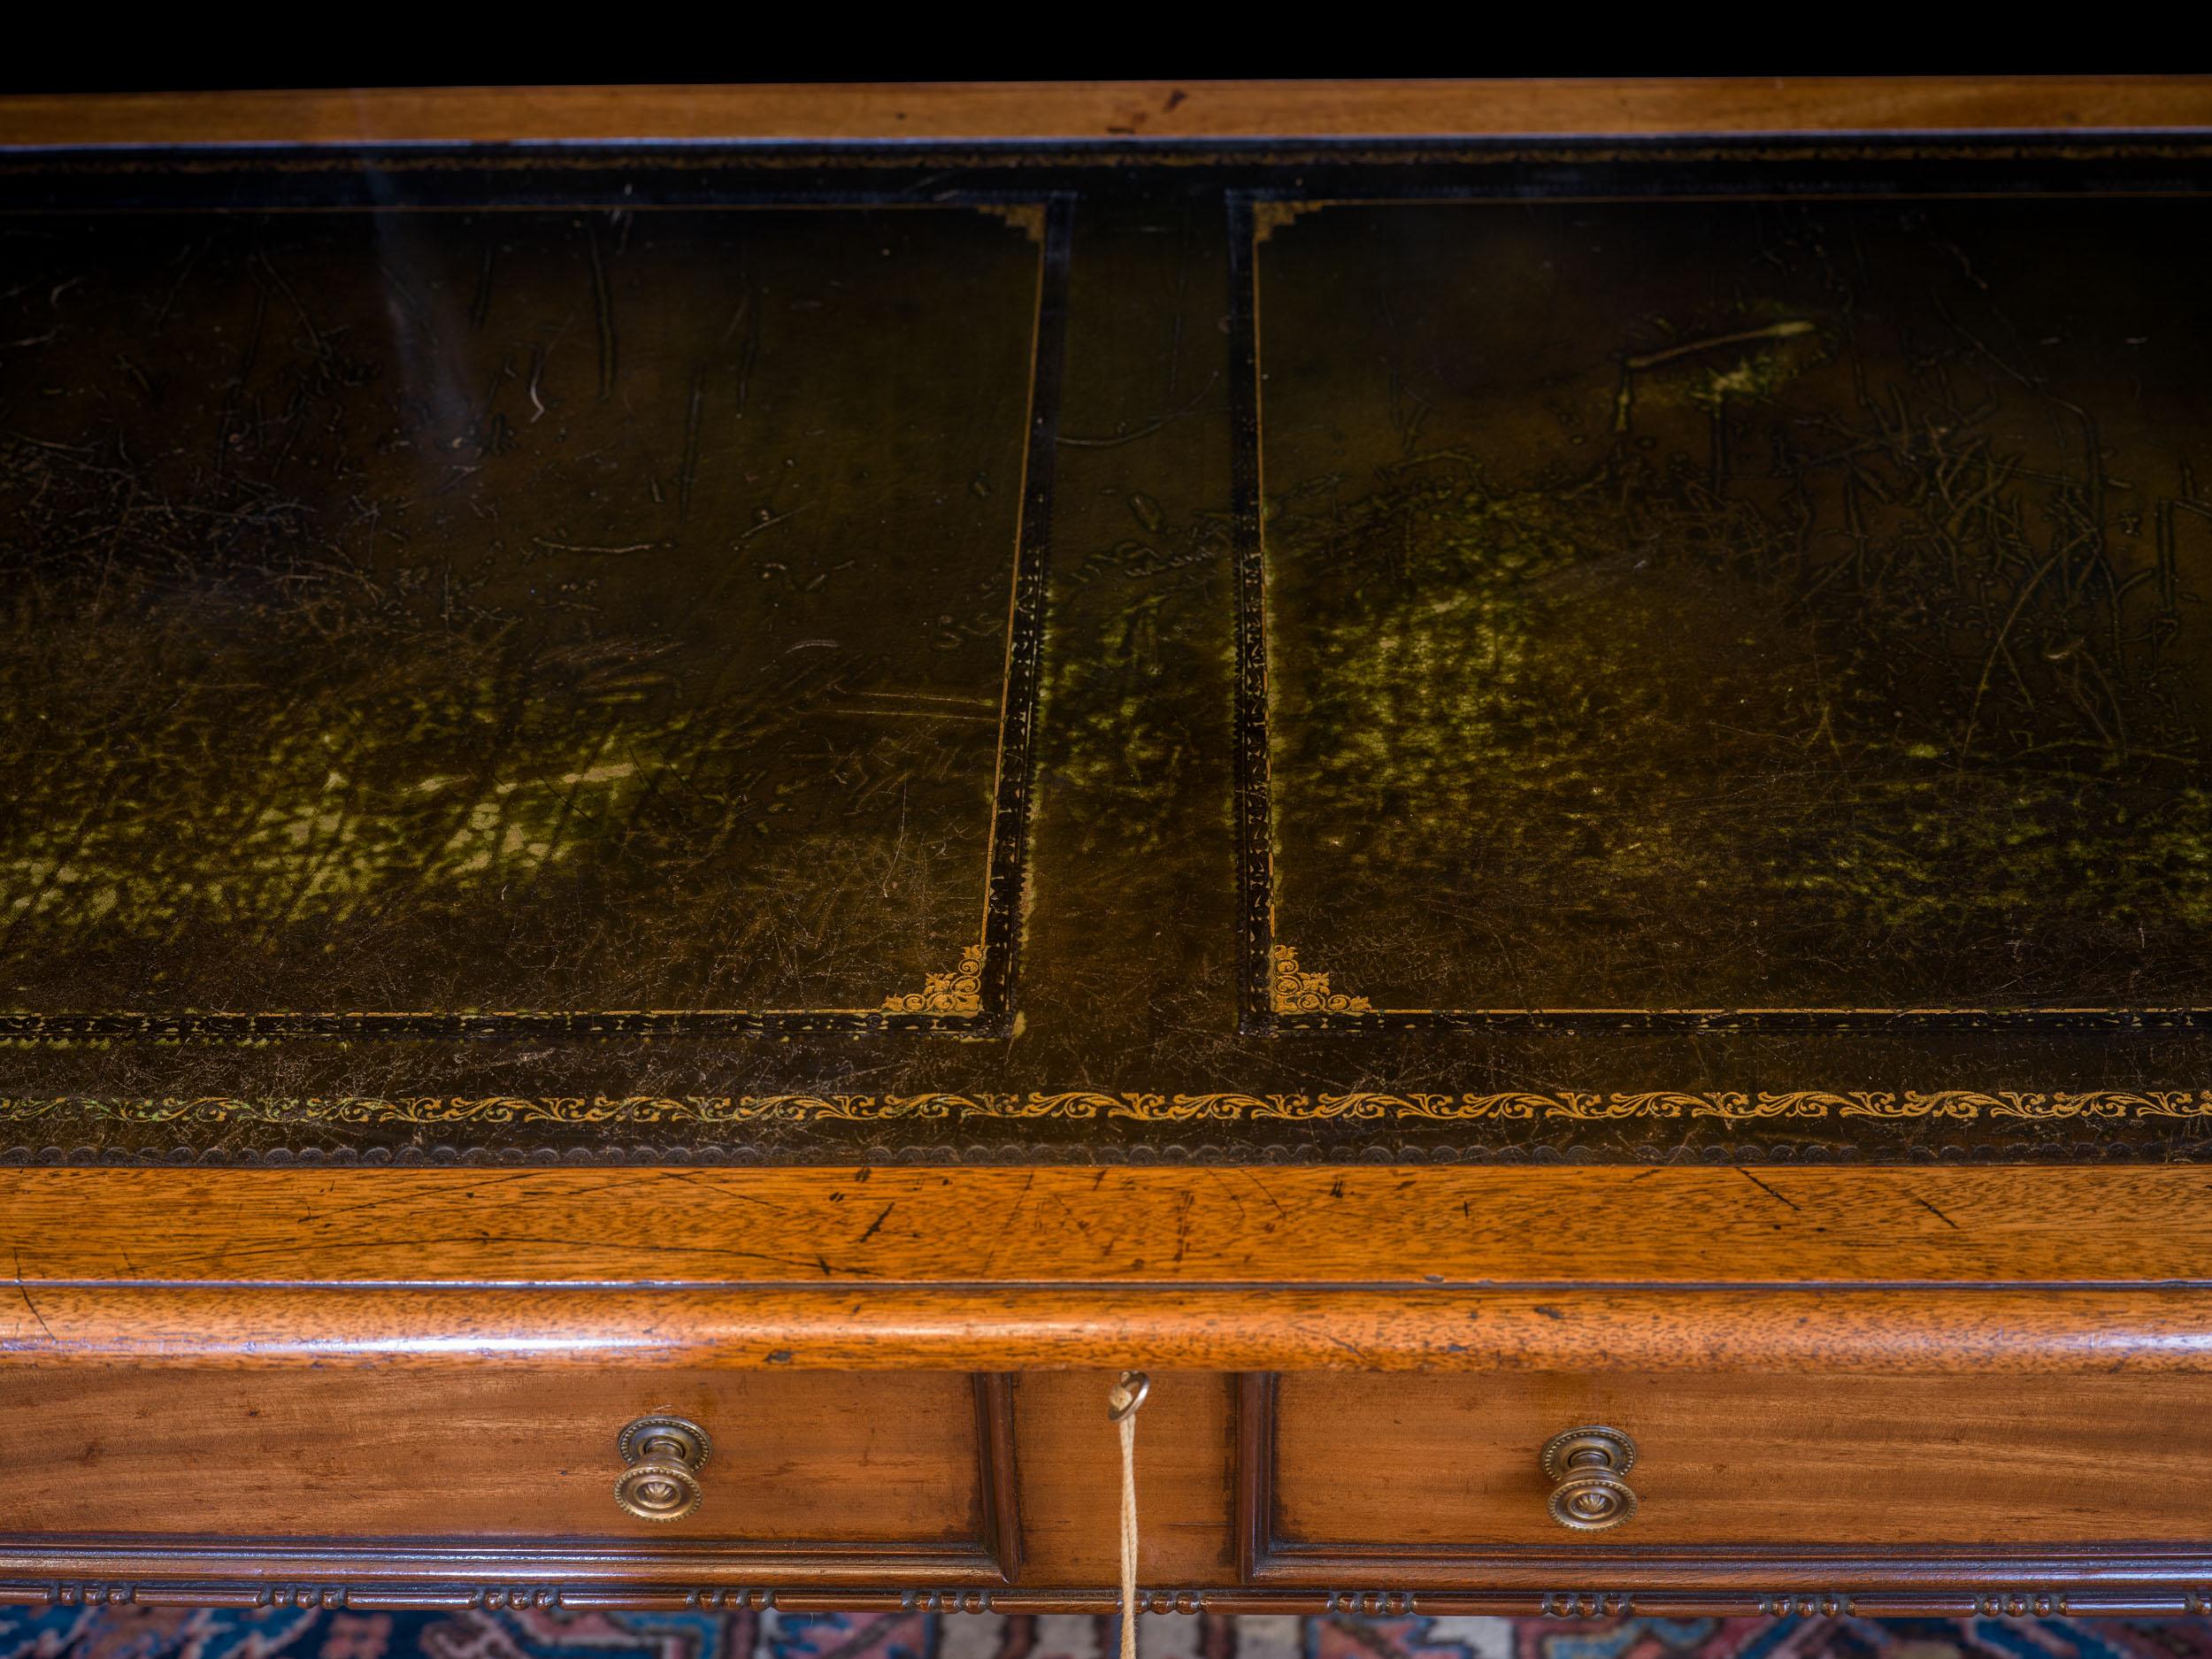 A rare William IV architect's plan table in mahogany, the top inset with gilt tooled leather above a hinged false drawer front revealing three baize lined trays, on carved bun feet and sunken castors.

English, c.1830.
